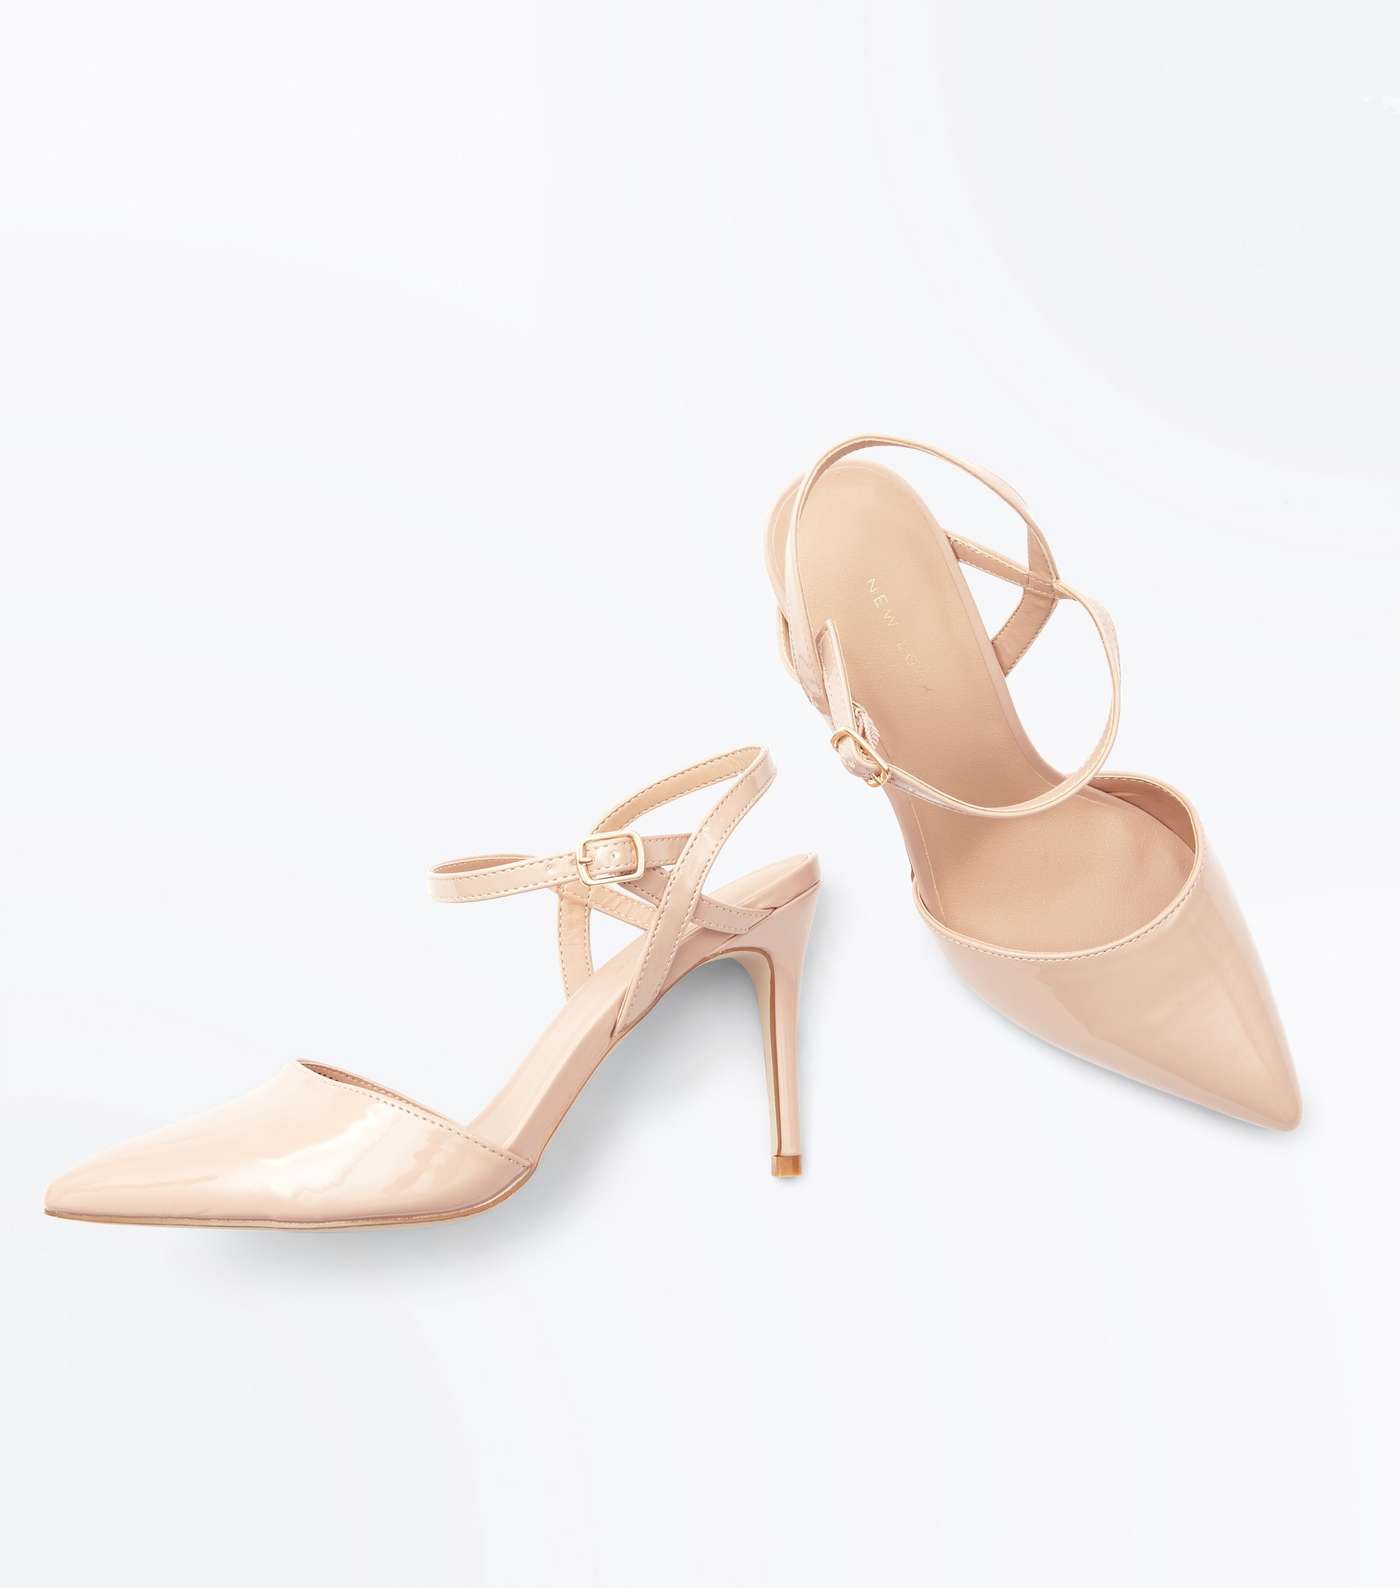 Nude Patent Ankle Strap Court Shoes Image 3